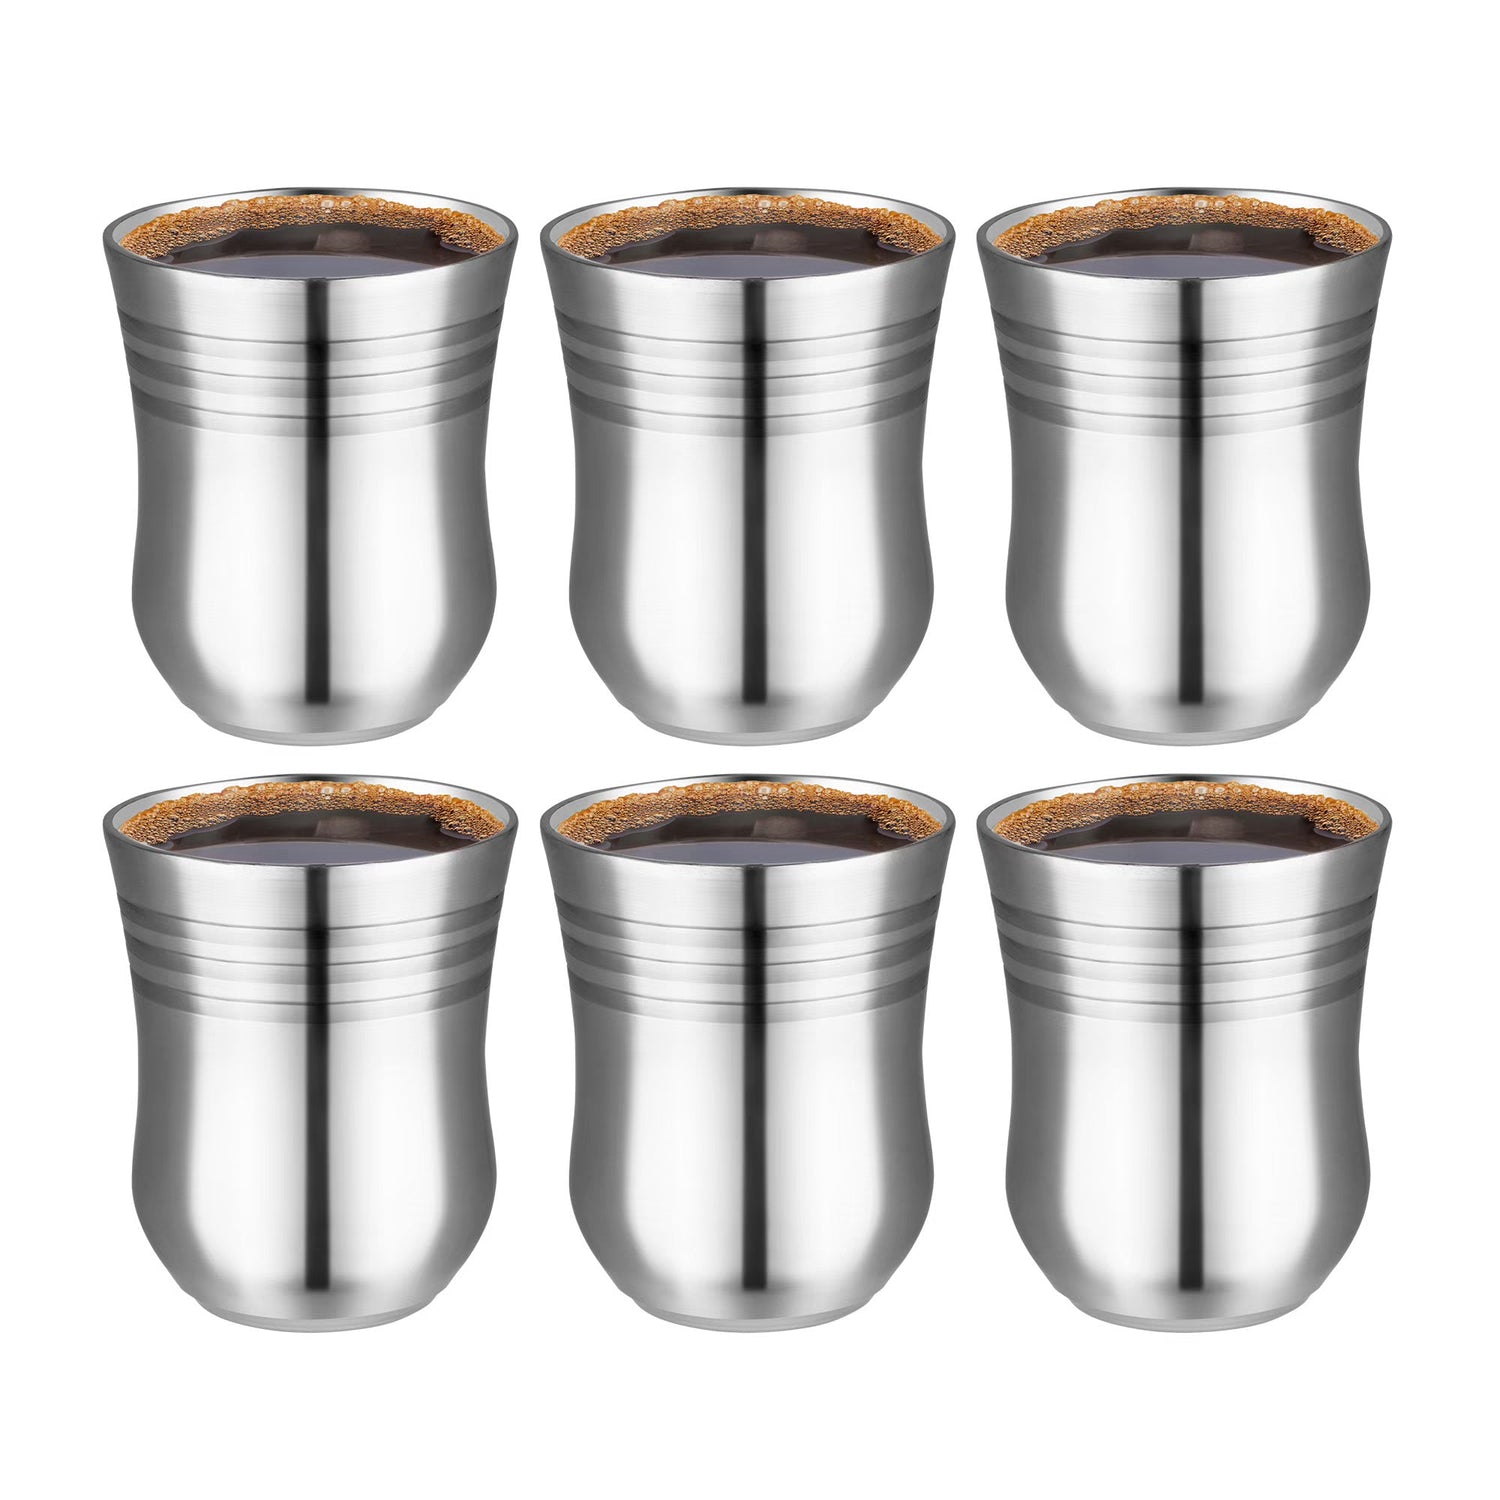 Pipal Kulhad Stainless Steel Glass 6pcs Set